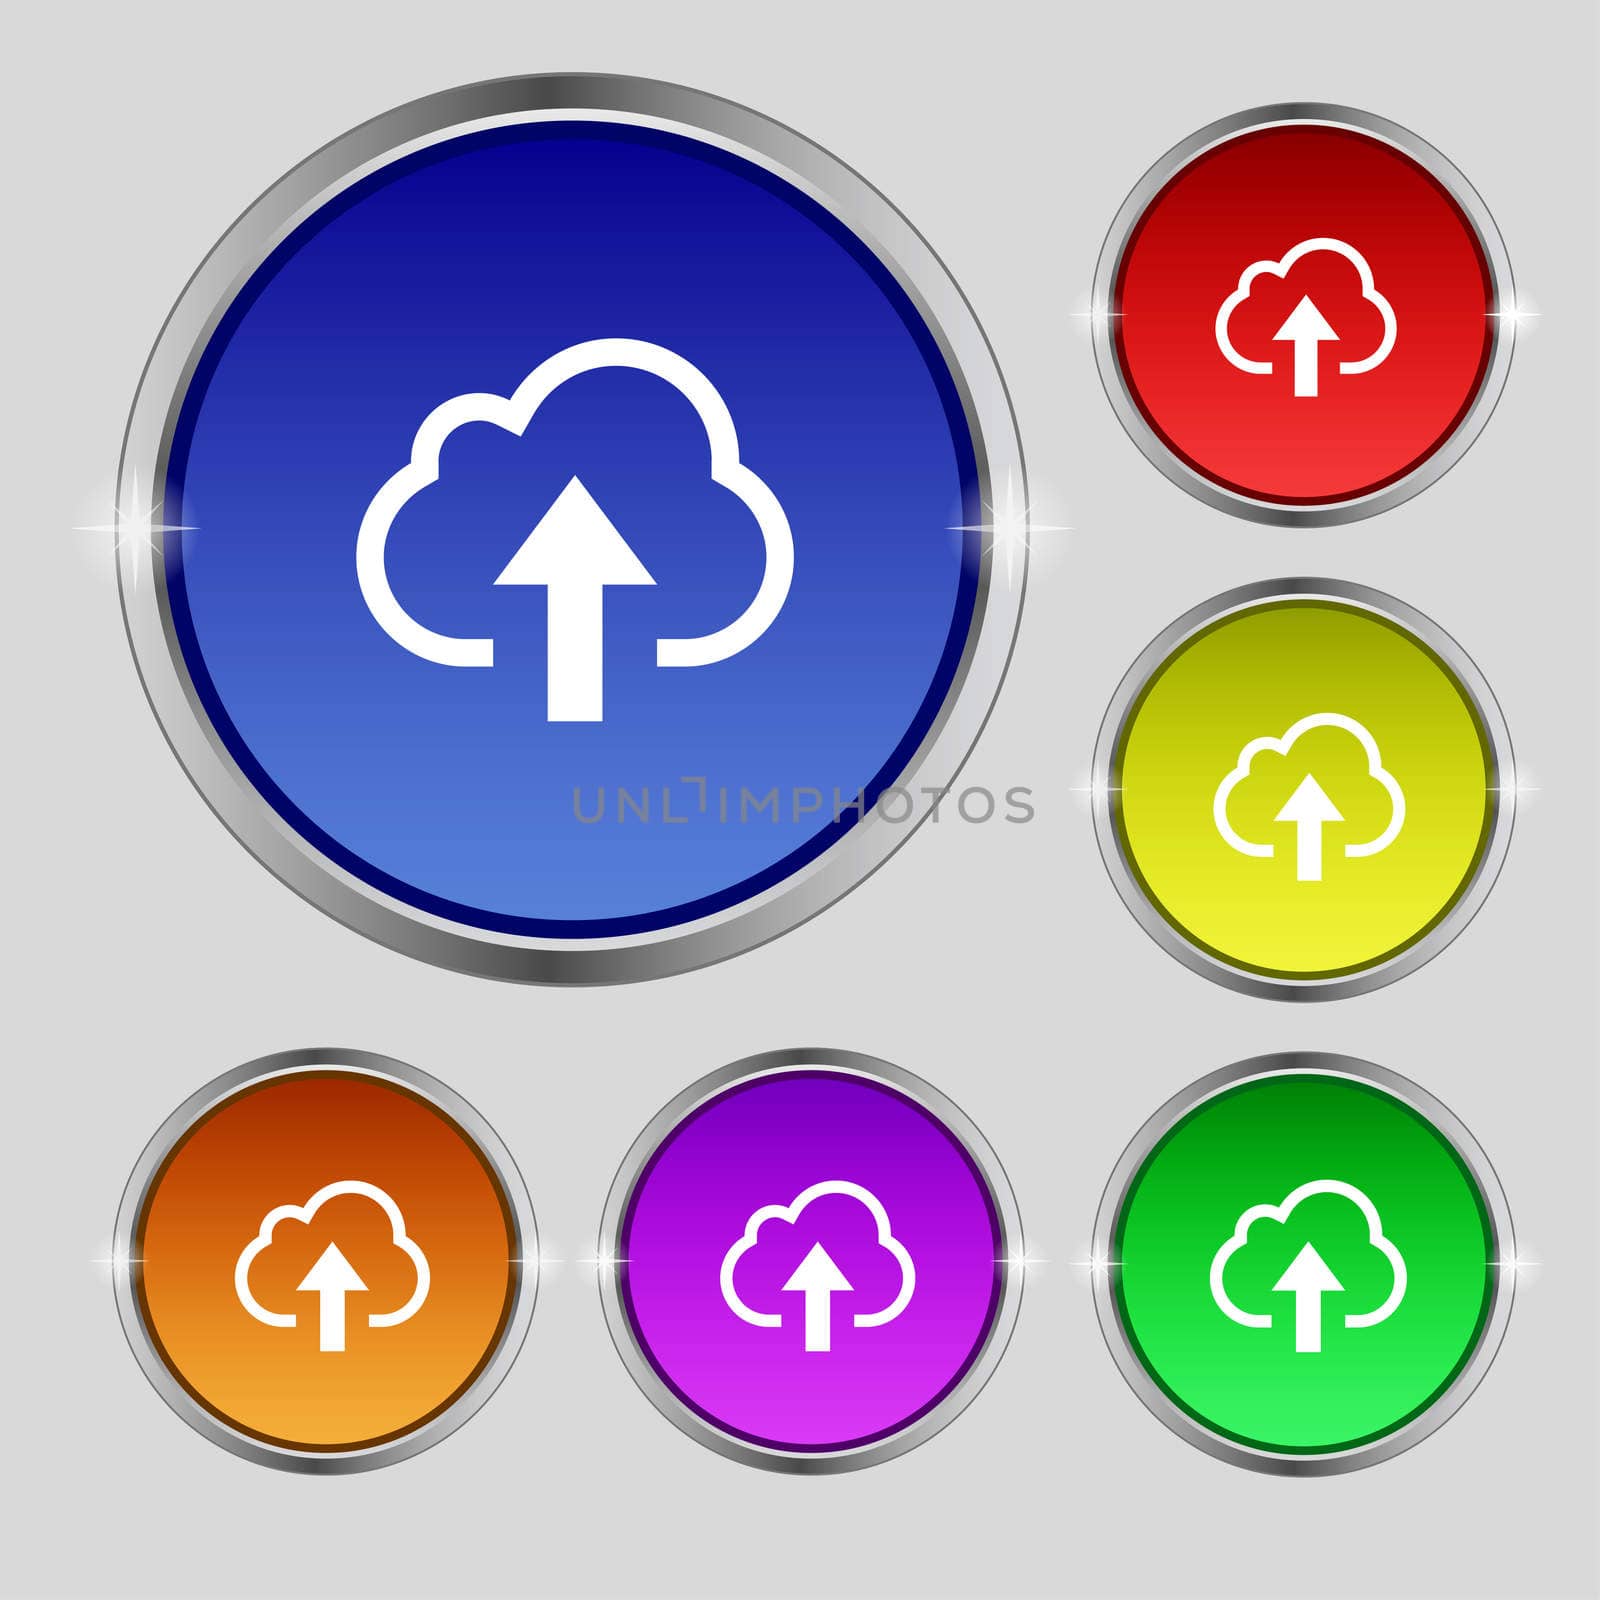 Upload from cloud icon sign. Round symbol on bright colourful buttons. illustration